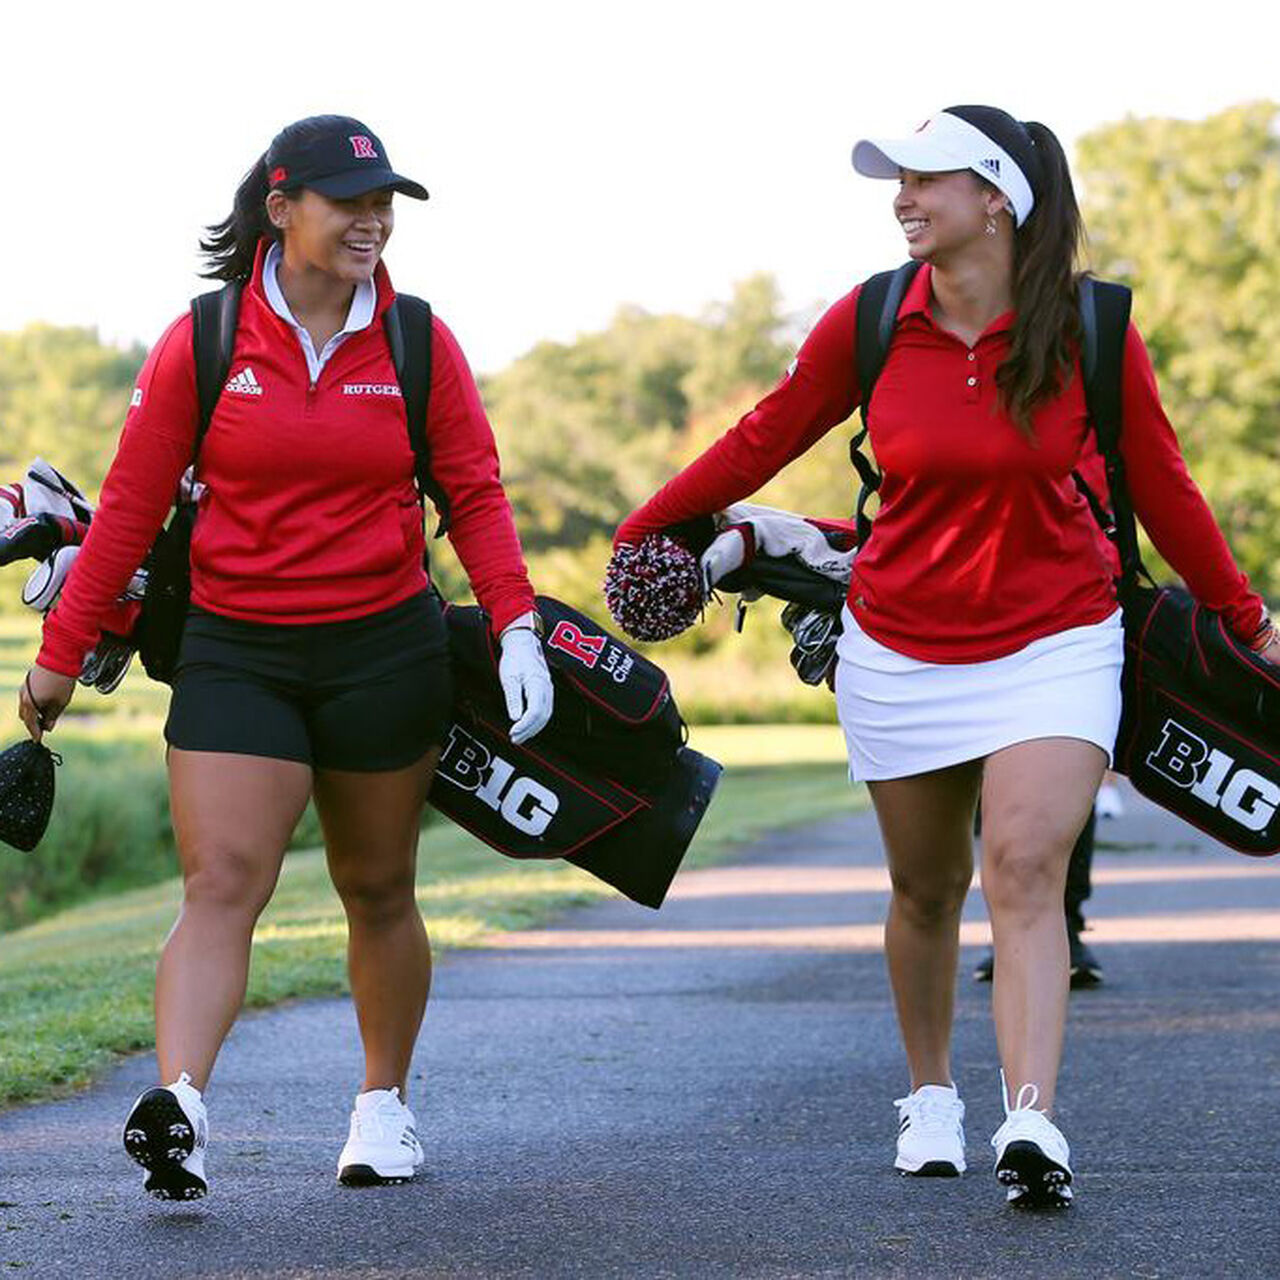 Two Rutgers Women's Golf players walking down a path and carrying their clubs while talking image number 0